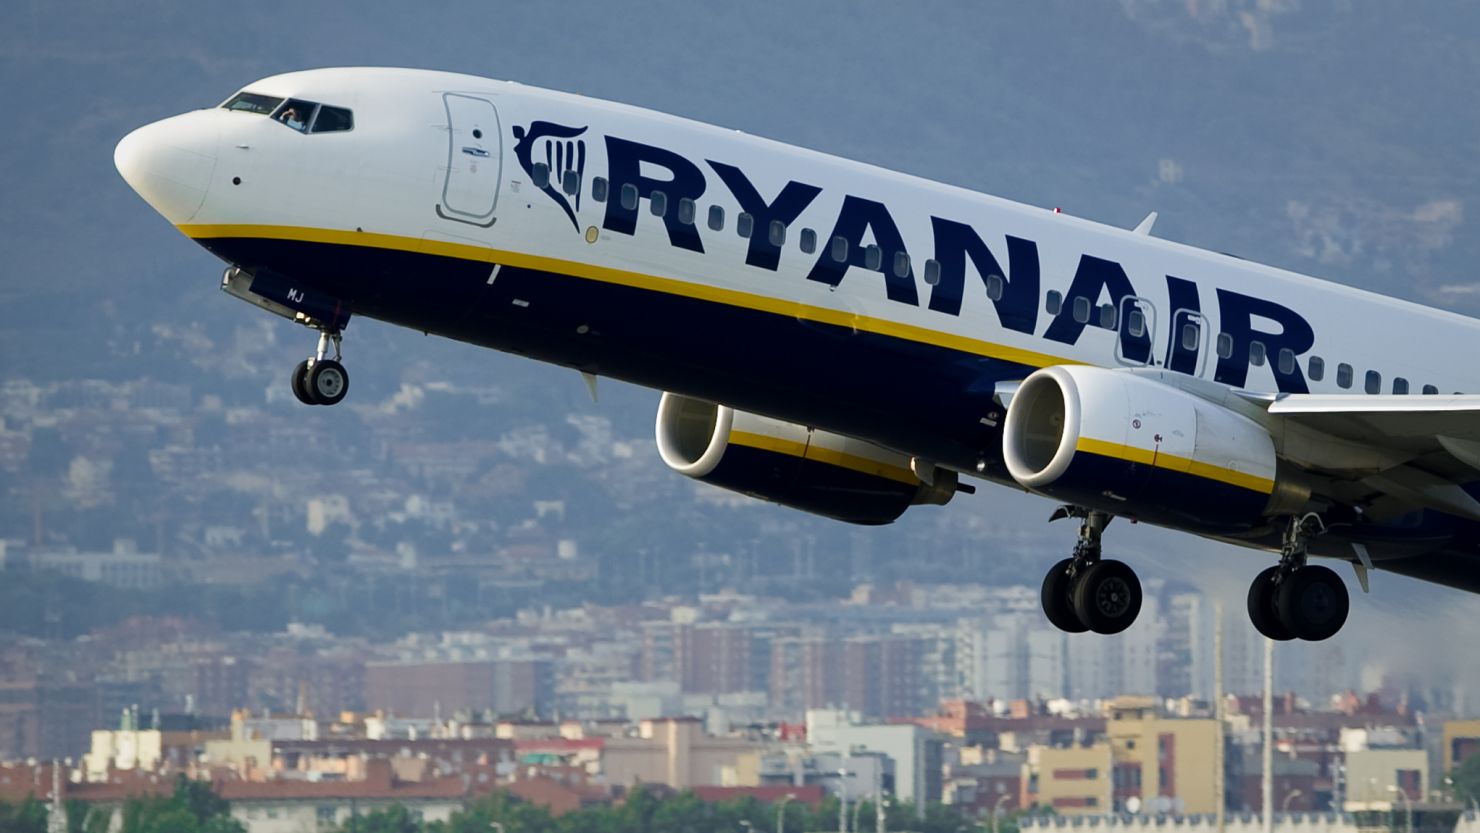 Irish airline Ryanair had to deal with a rowdy bachelor party on a flight from the UK to Slovakia.